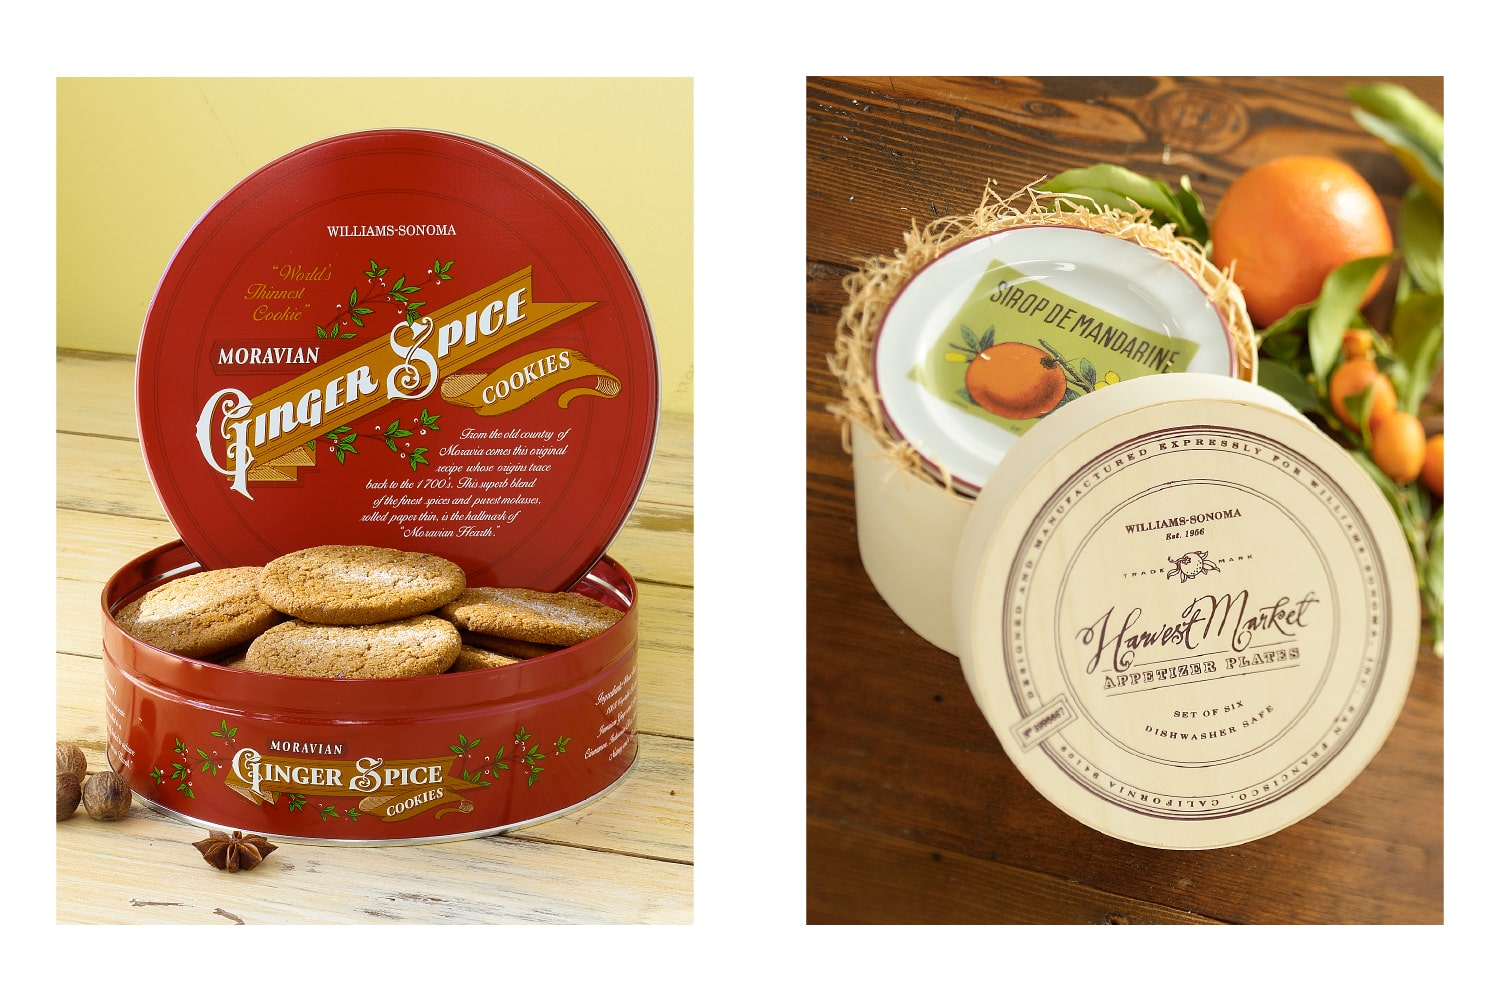 Williams Sonoma Moravian Ginger Spice Cookie packaging and Harvest Market packaging. Design and photo creative direction by Juli Shore Design